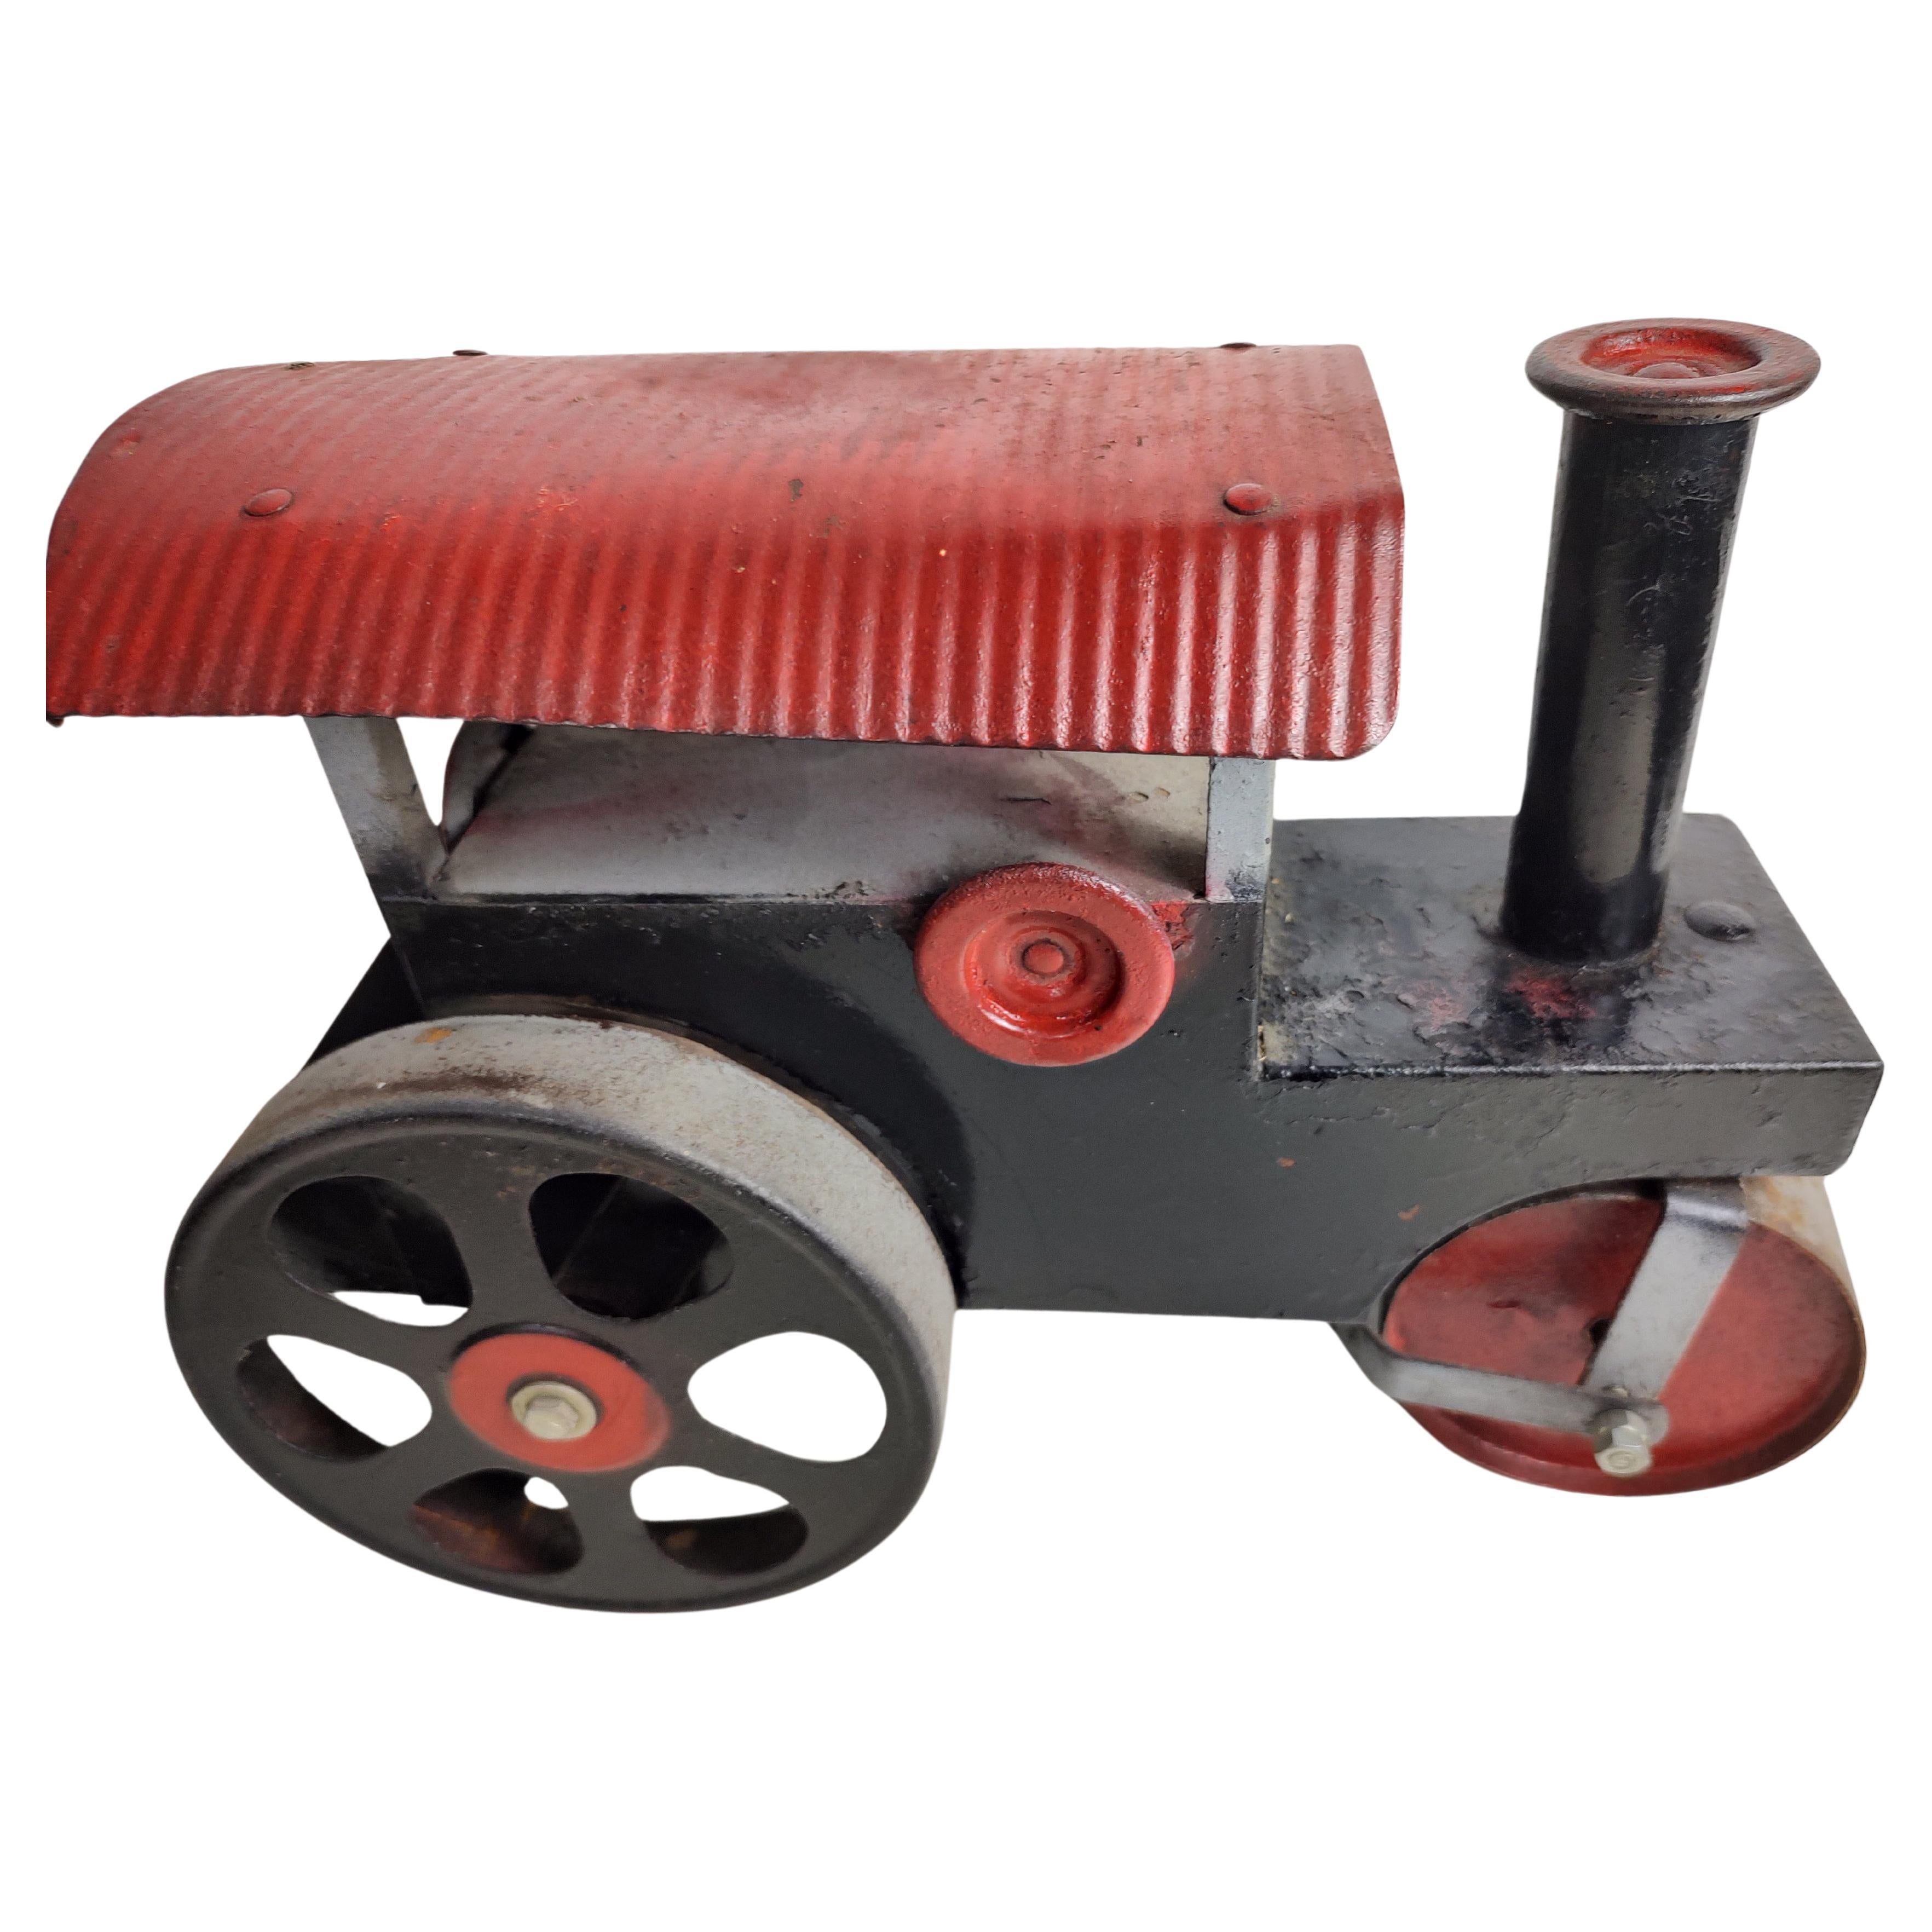 Folk Art Antique Toy Steamroller C1940 Style of Buddy L For Sale